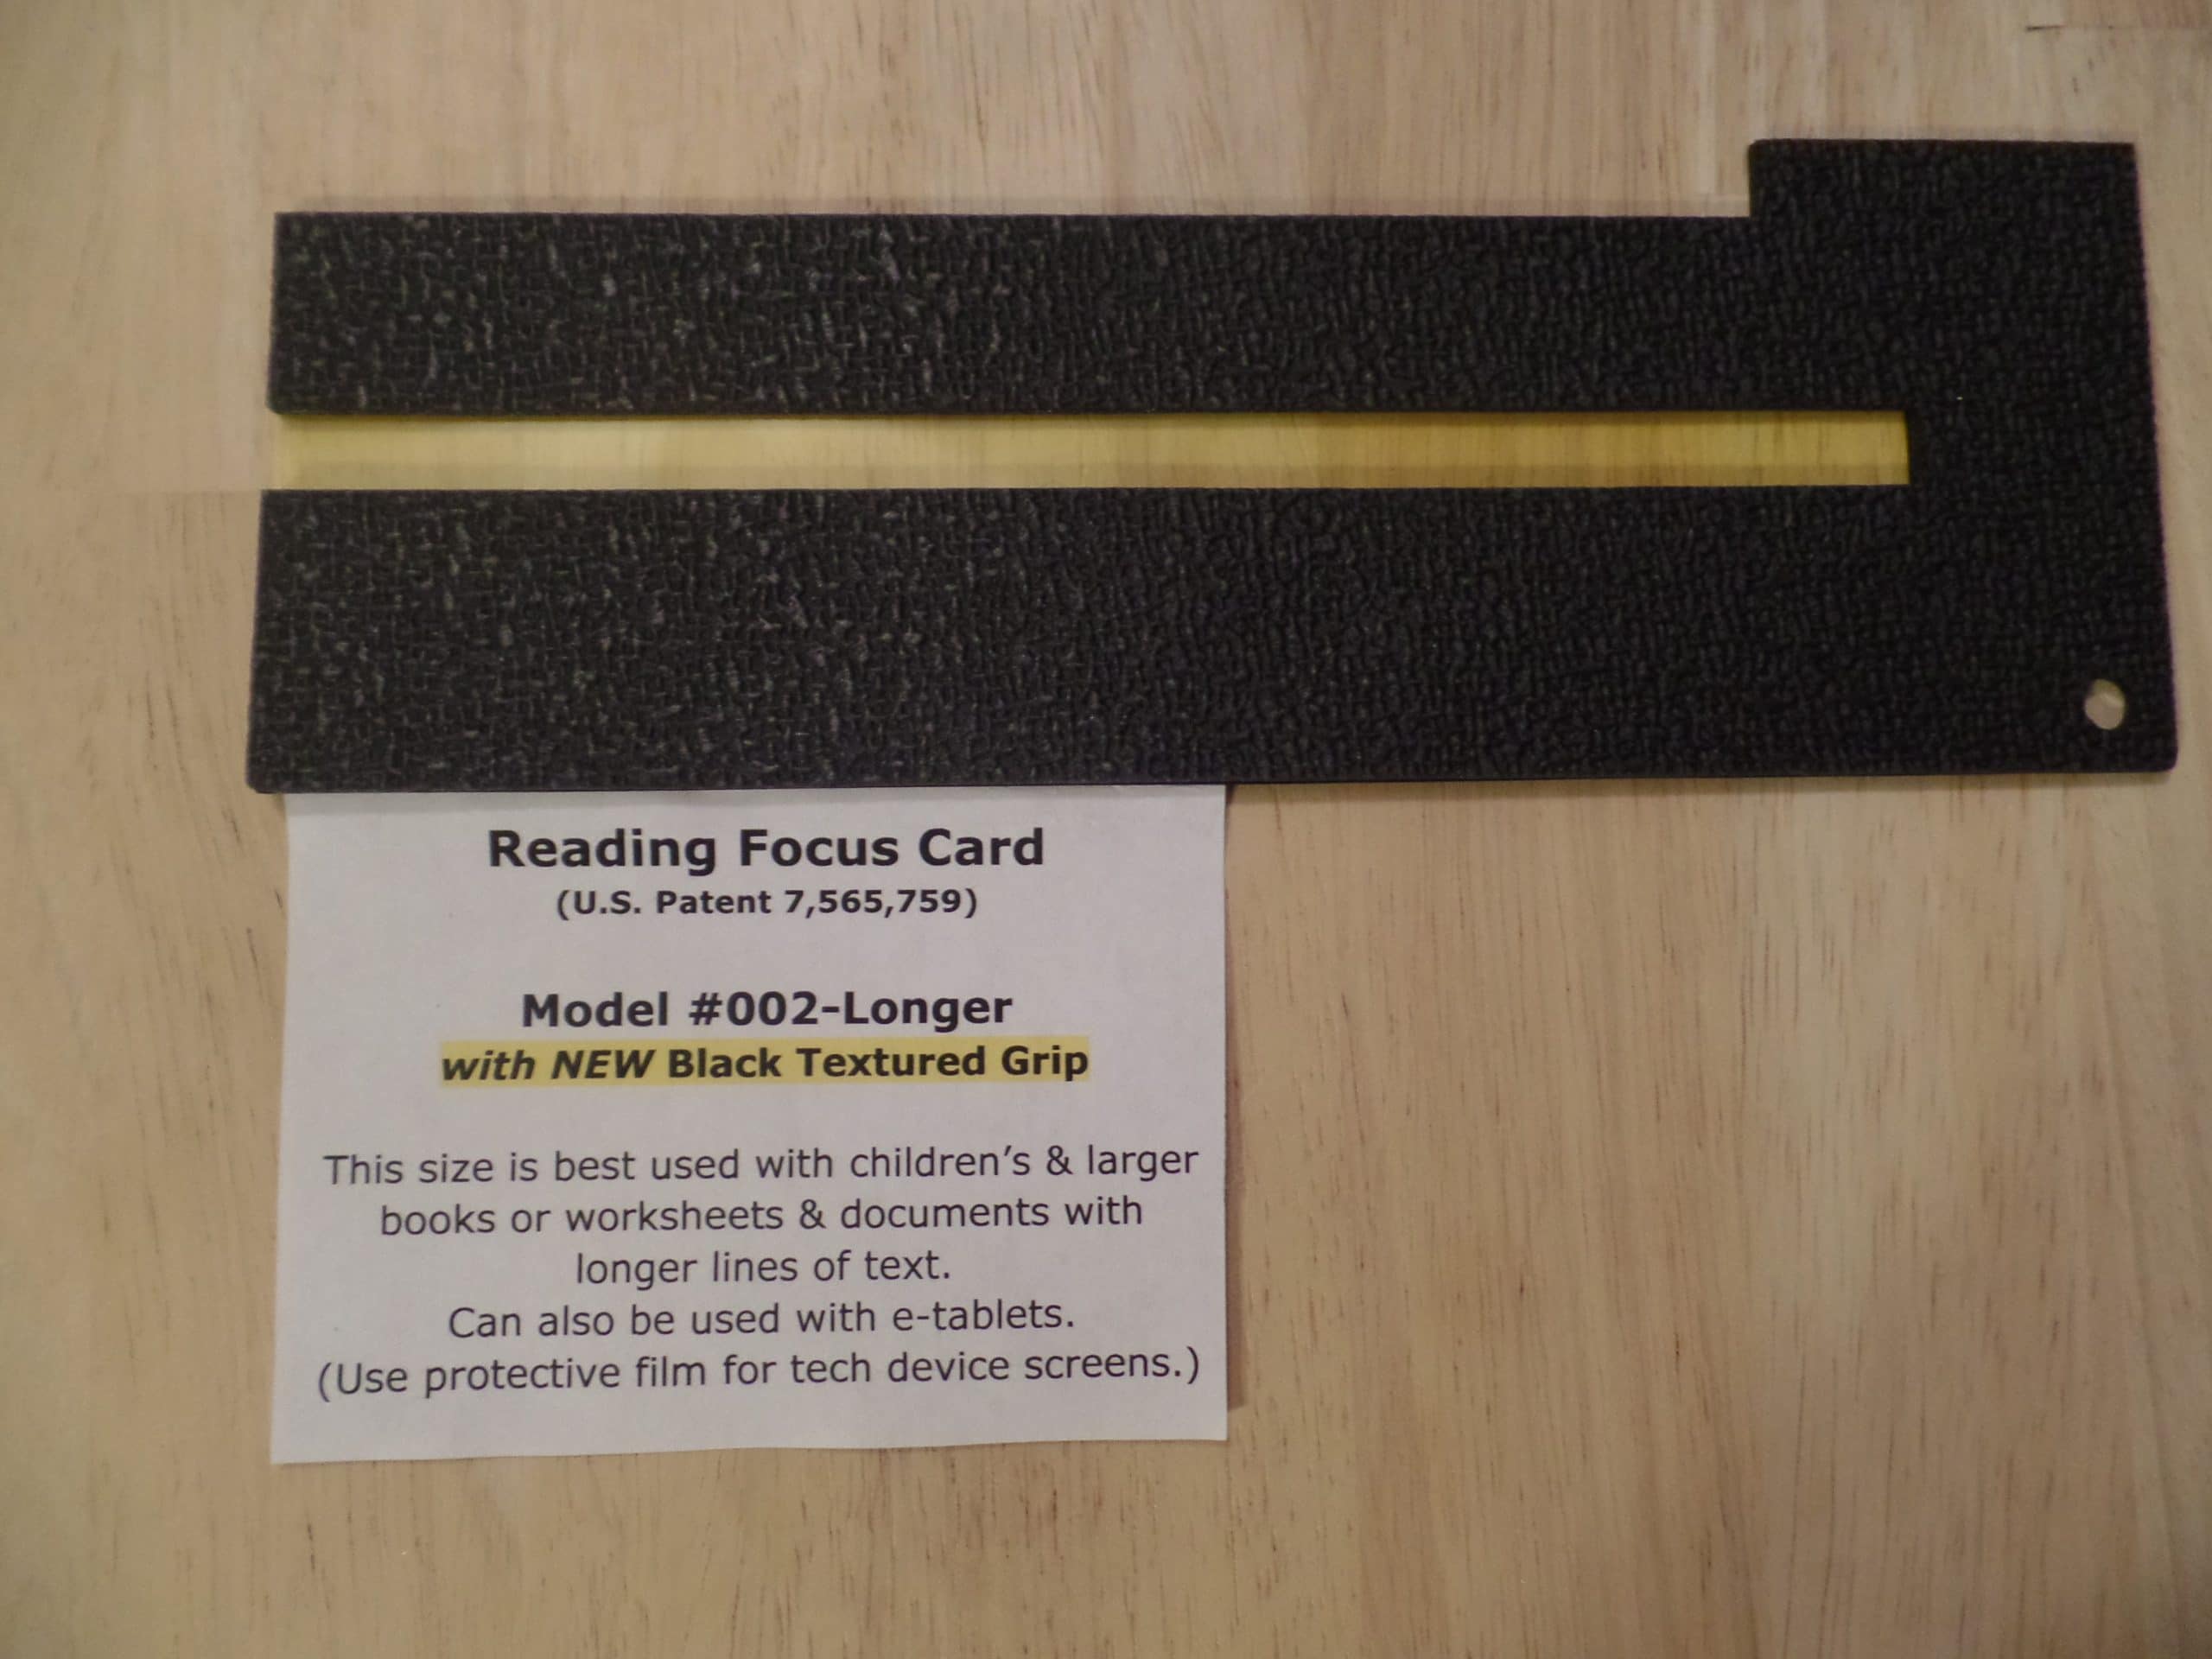 Reading Focus Cards – My Review